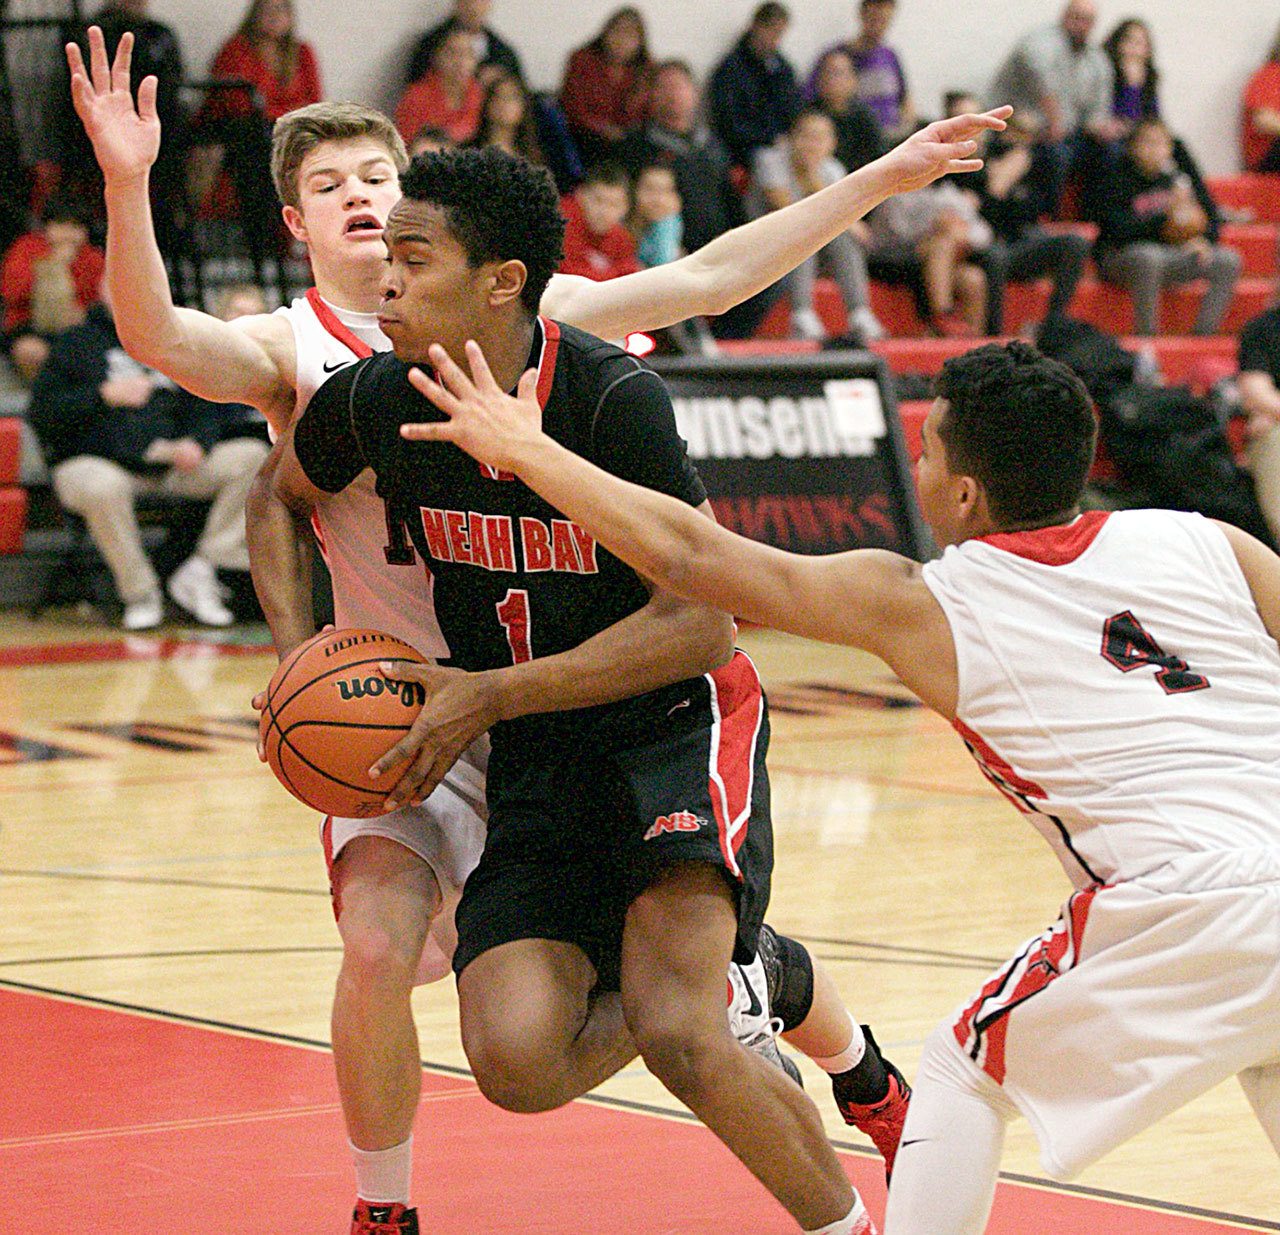 Steve Mullensky/for Peninsula Daily News Neah Bay’s Rweha Munyagi blasts through the defense put up by Redhawks Berkley Hill and Jacob Boucher, 4, during a Crush in the Slush game played at Port Townsend High School on Friday.